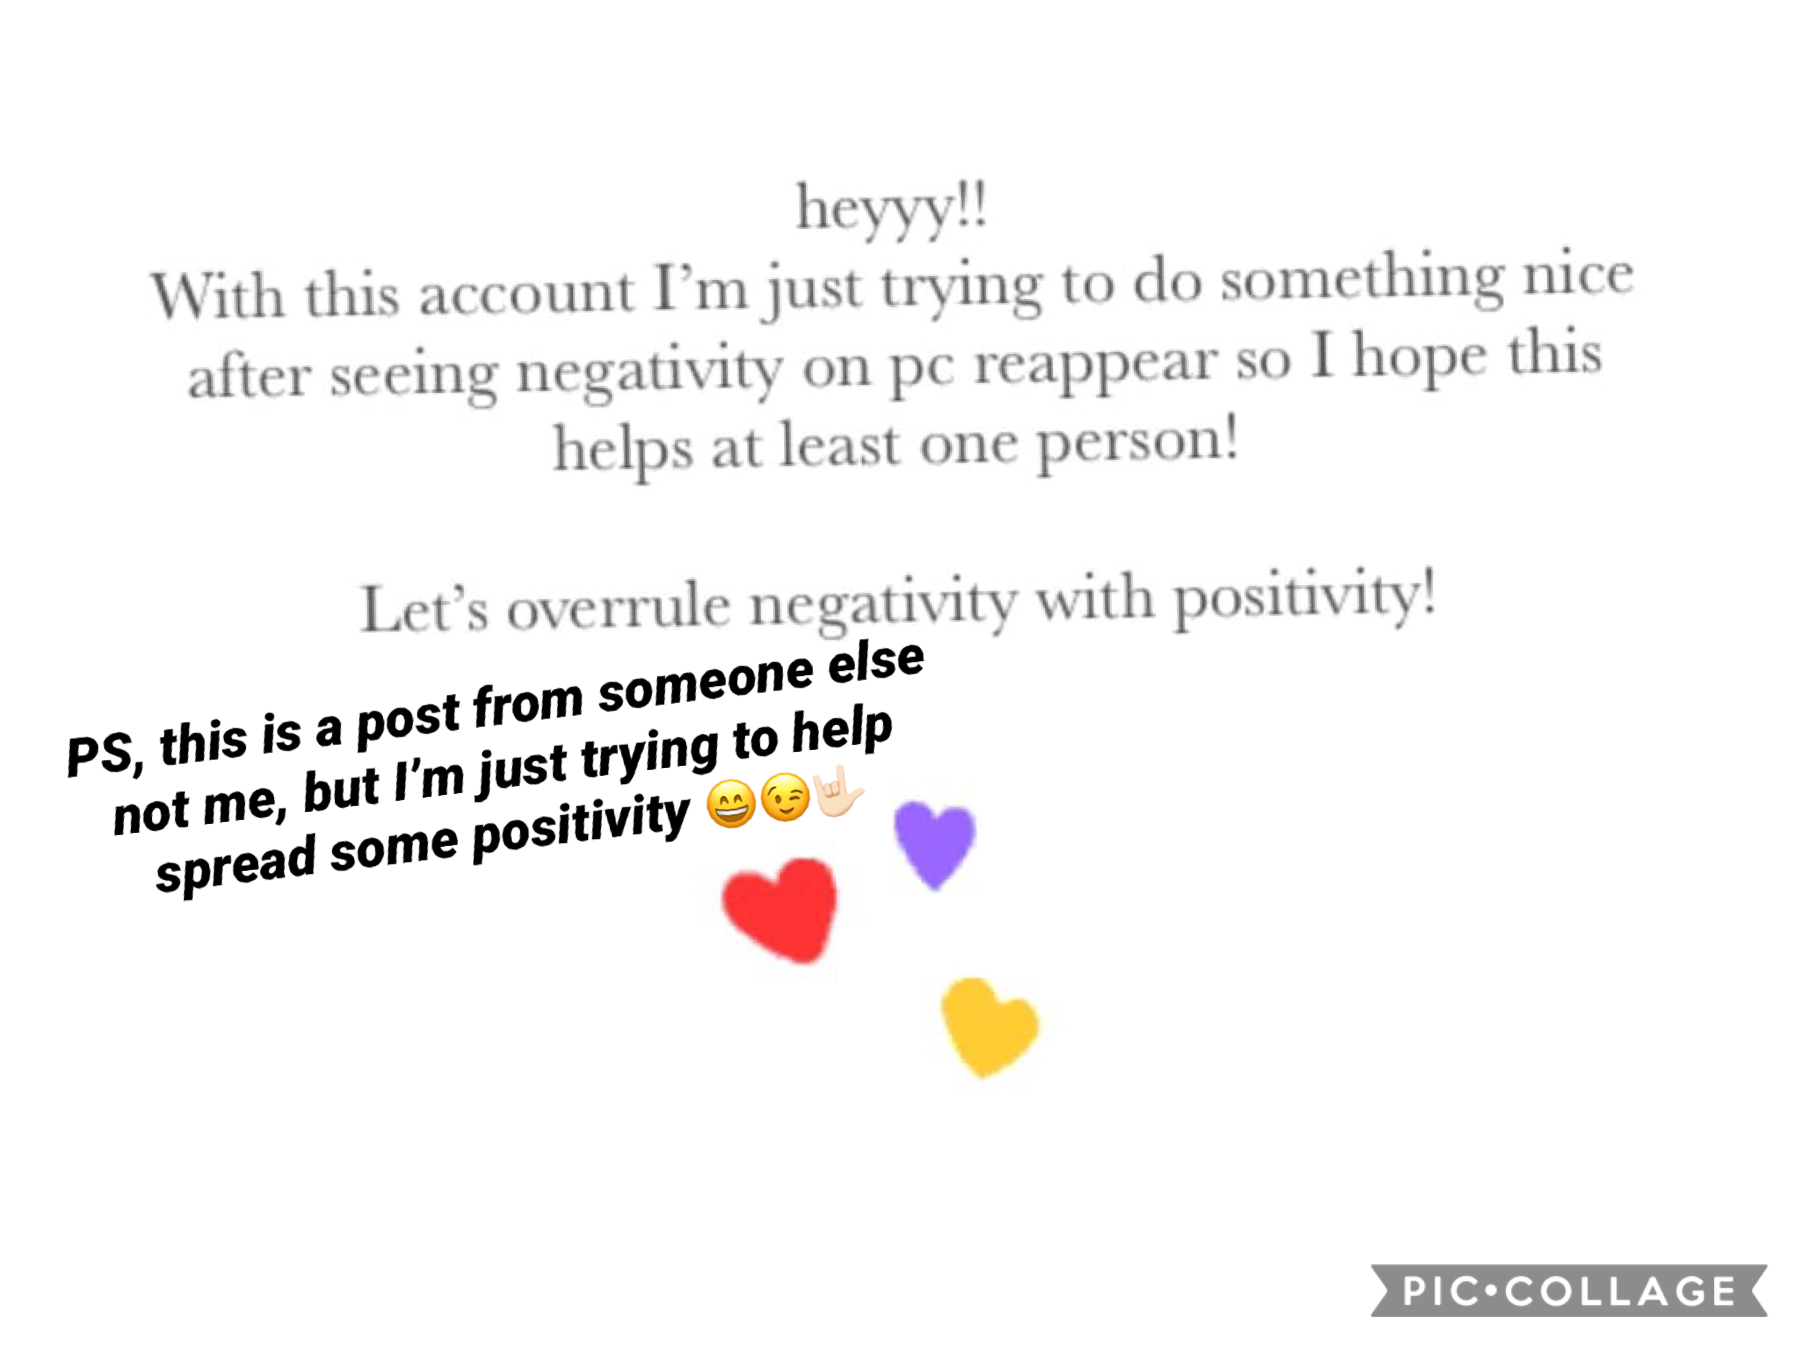 Just tryna help spread some positivity 😁😄😉😋🤟🏻